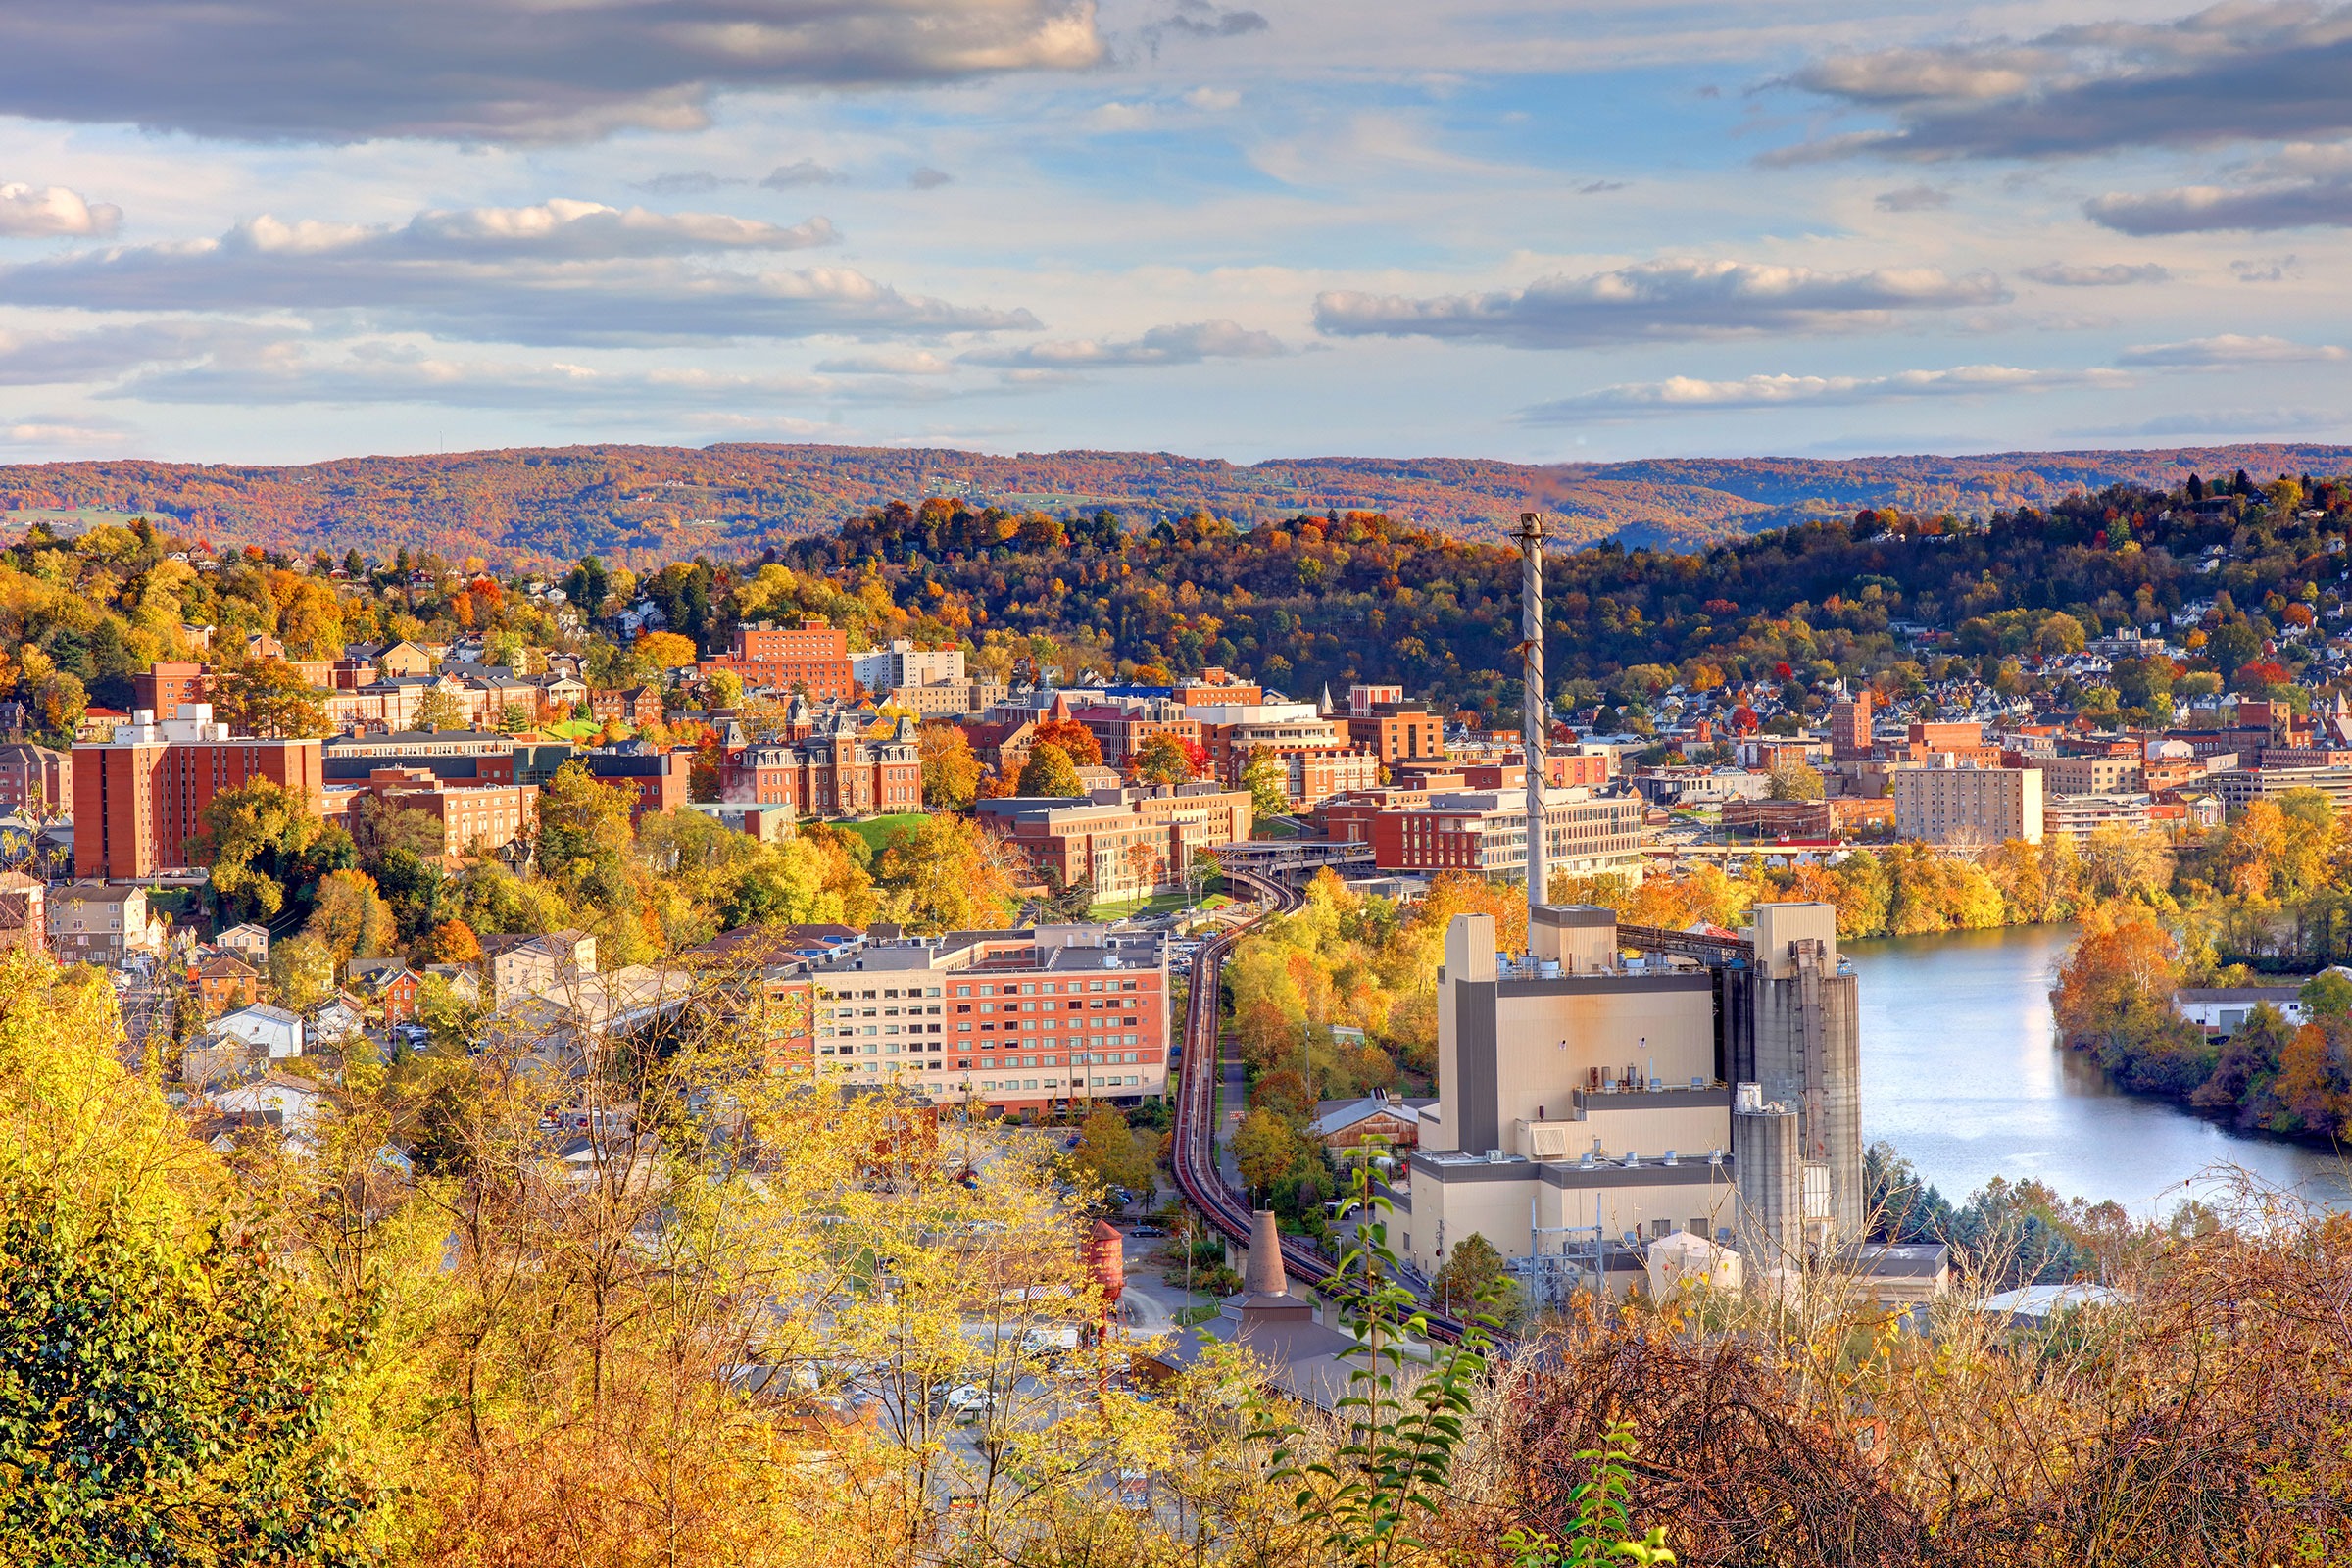 Incredible New Home Communities that Make Morgantown One of the Best Places to Live in WV